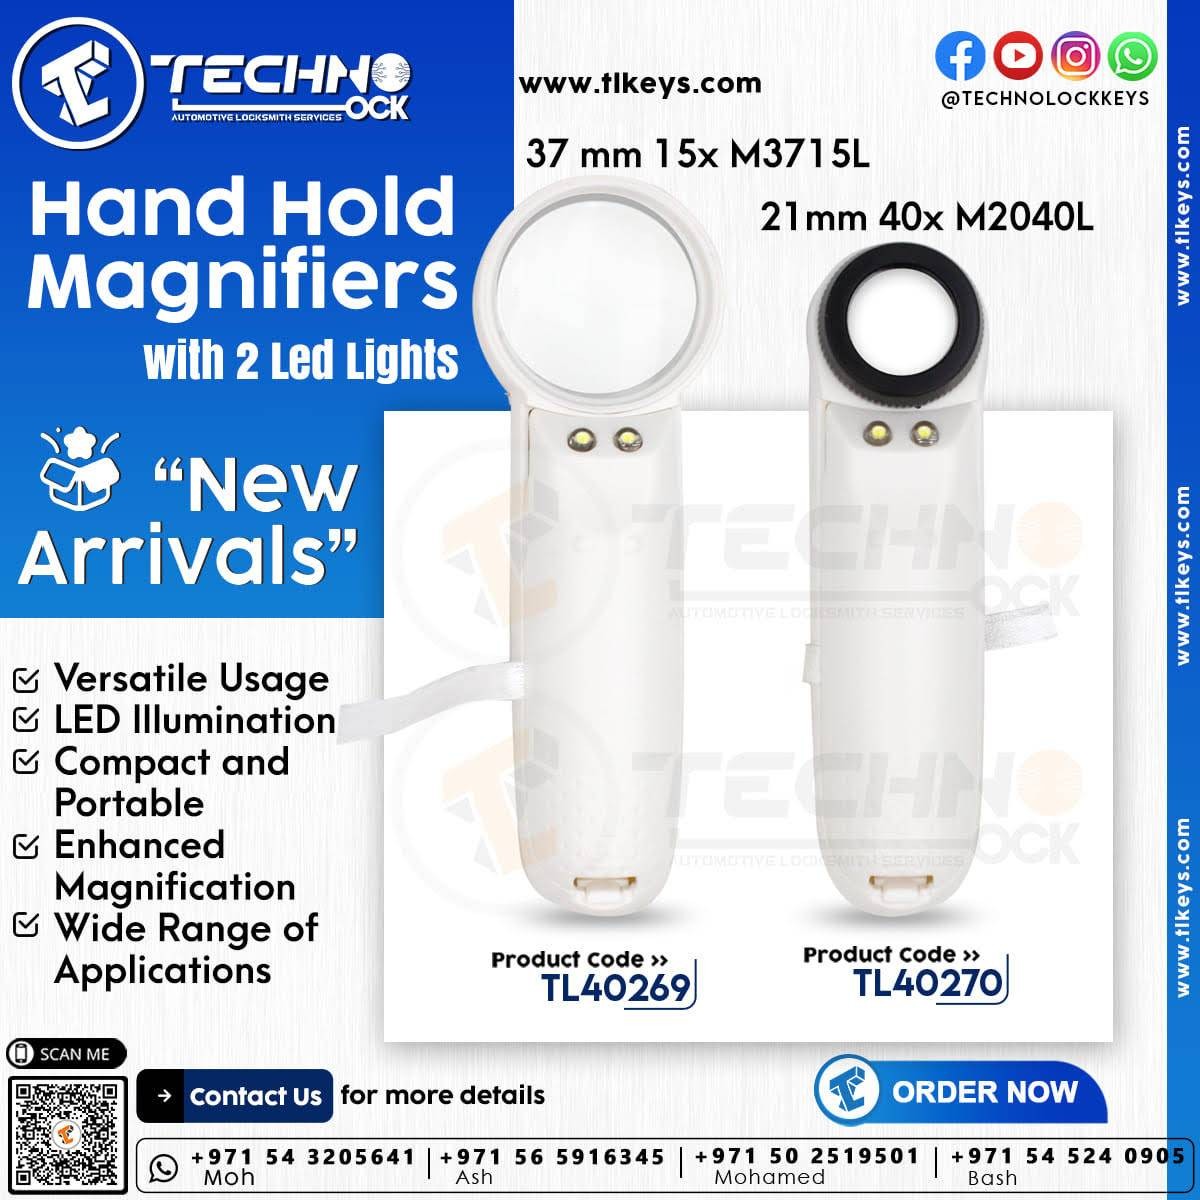 Hand Hold Magnifier 21mm 40x M2040L with 2 Led Light